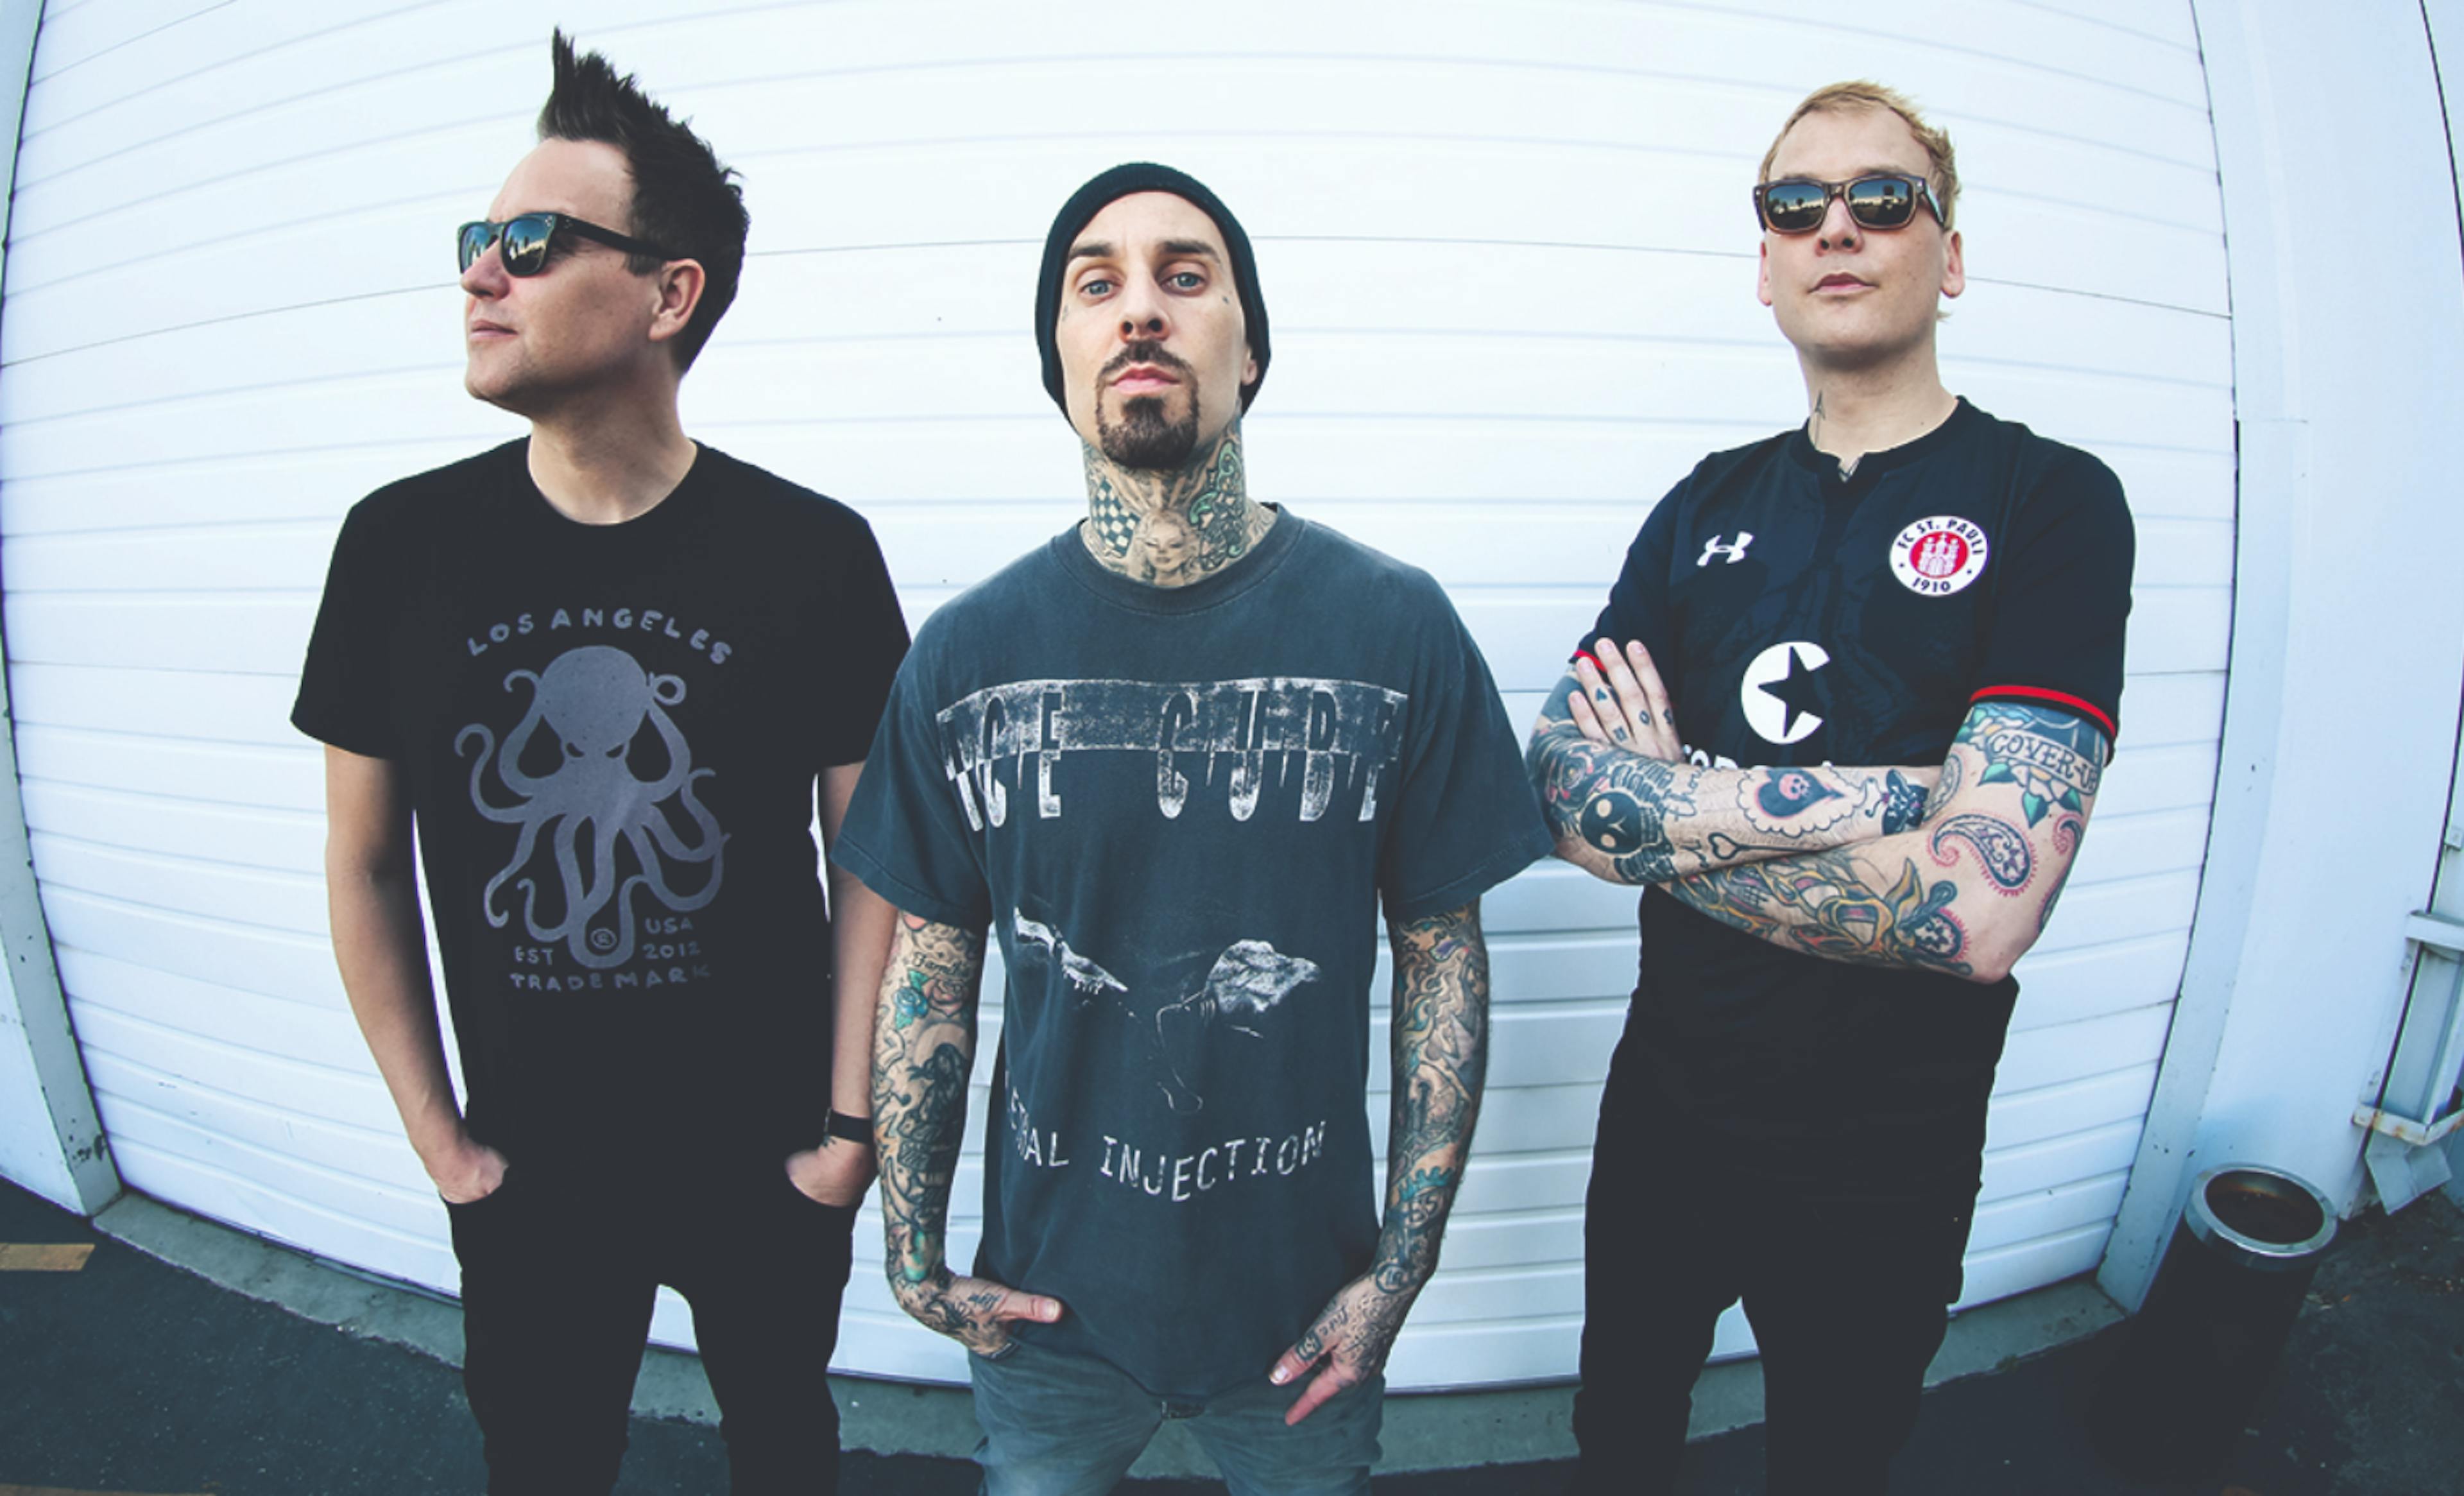 blink-182's New Album Will Drop Before Warped Tour, Features Pharrell Williams